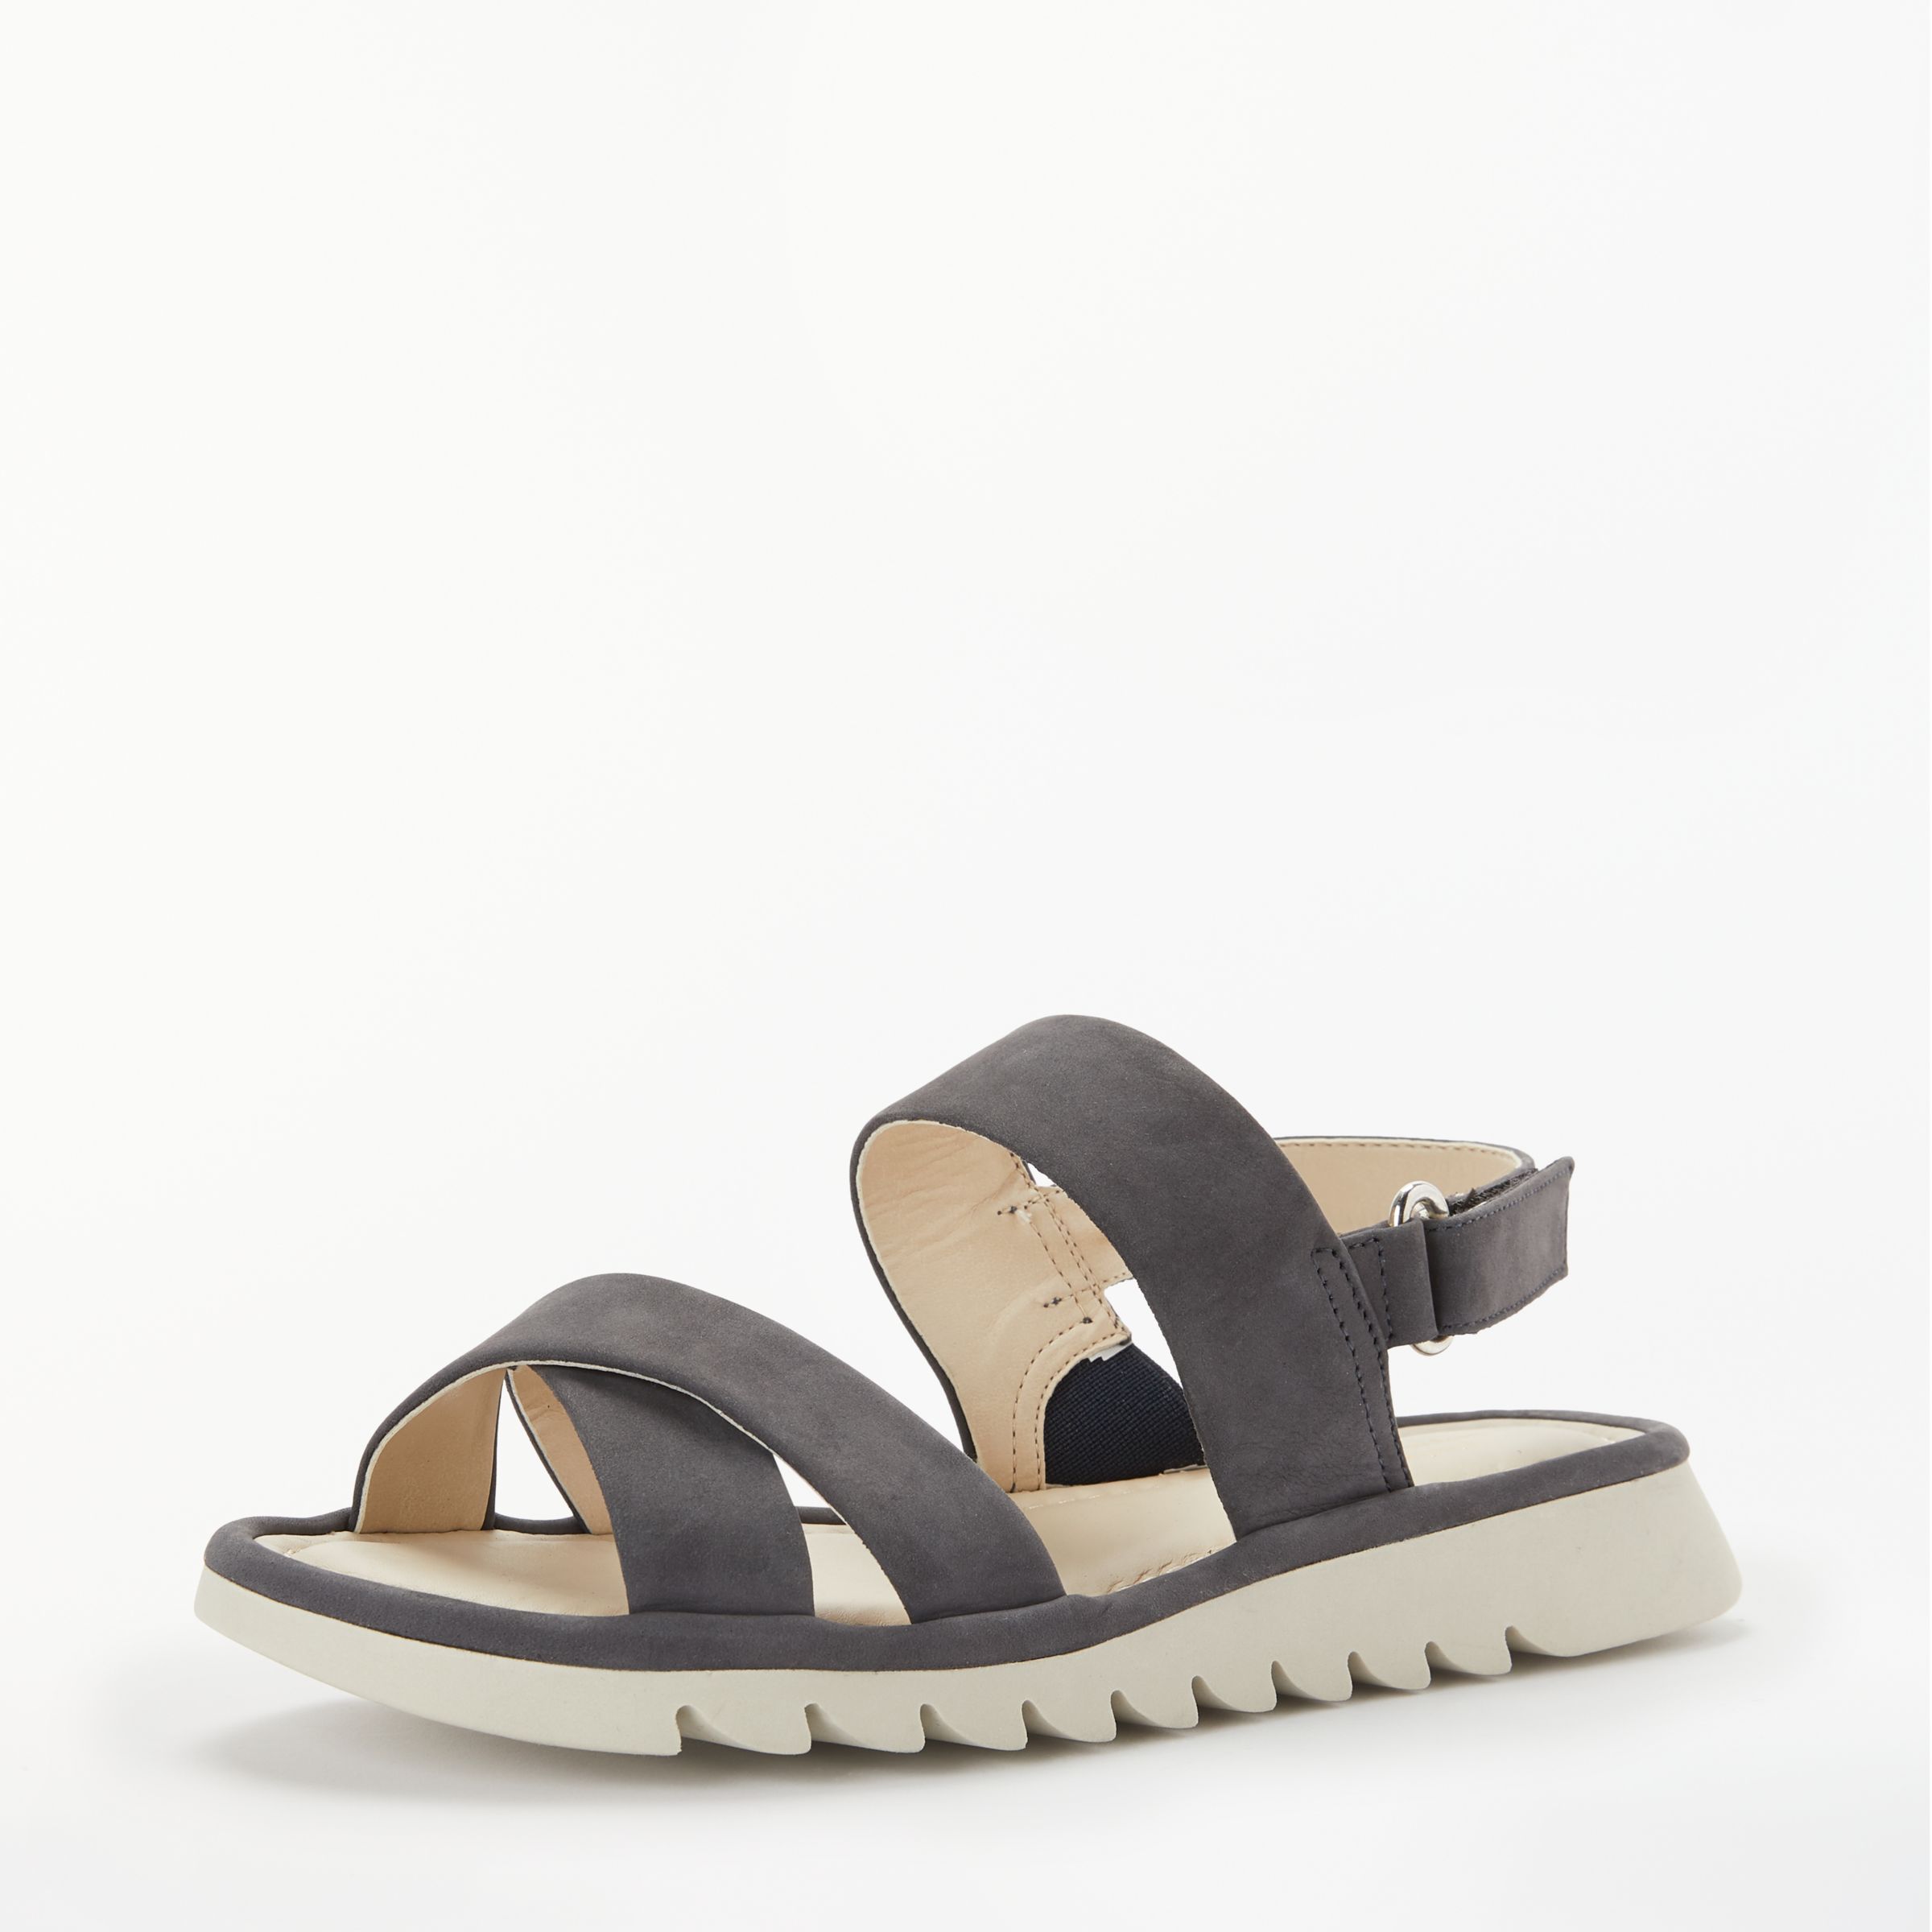 John Lewis & Partners Designed for Comfort Lucy Cross Strap Sandals